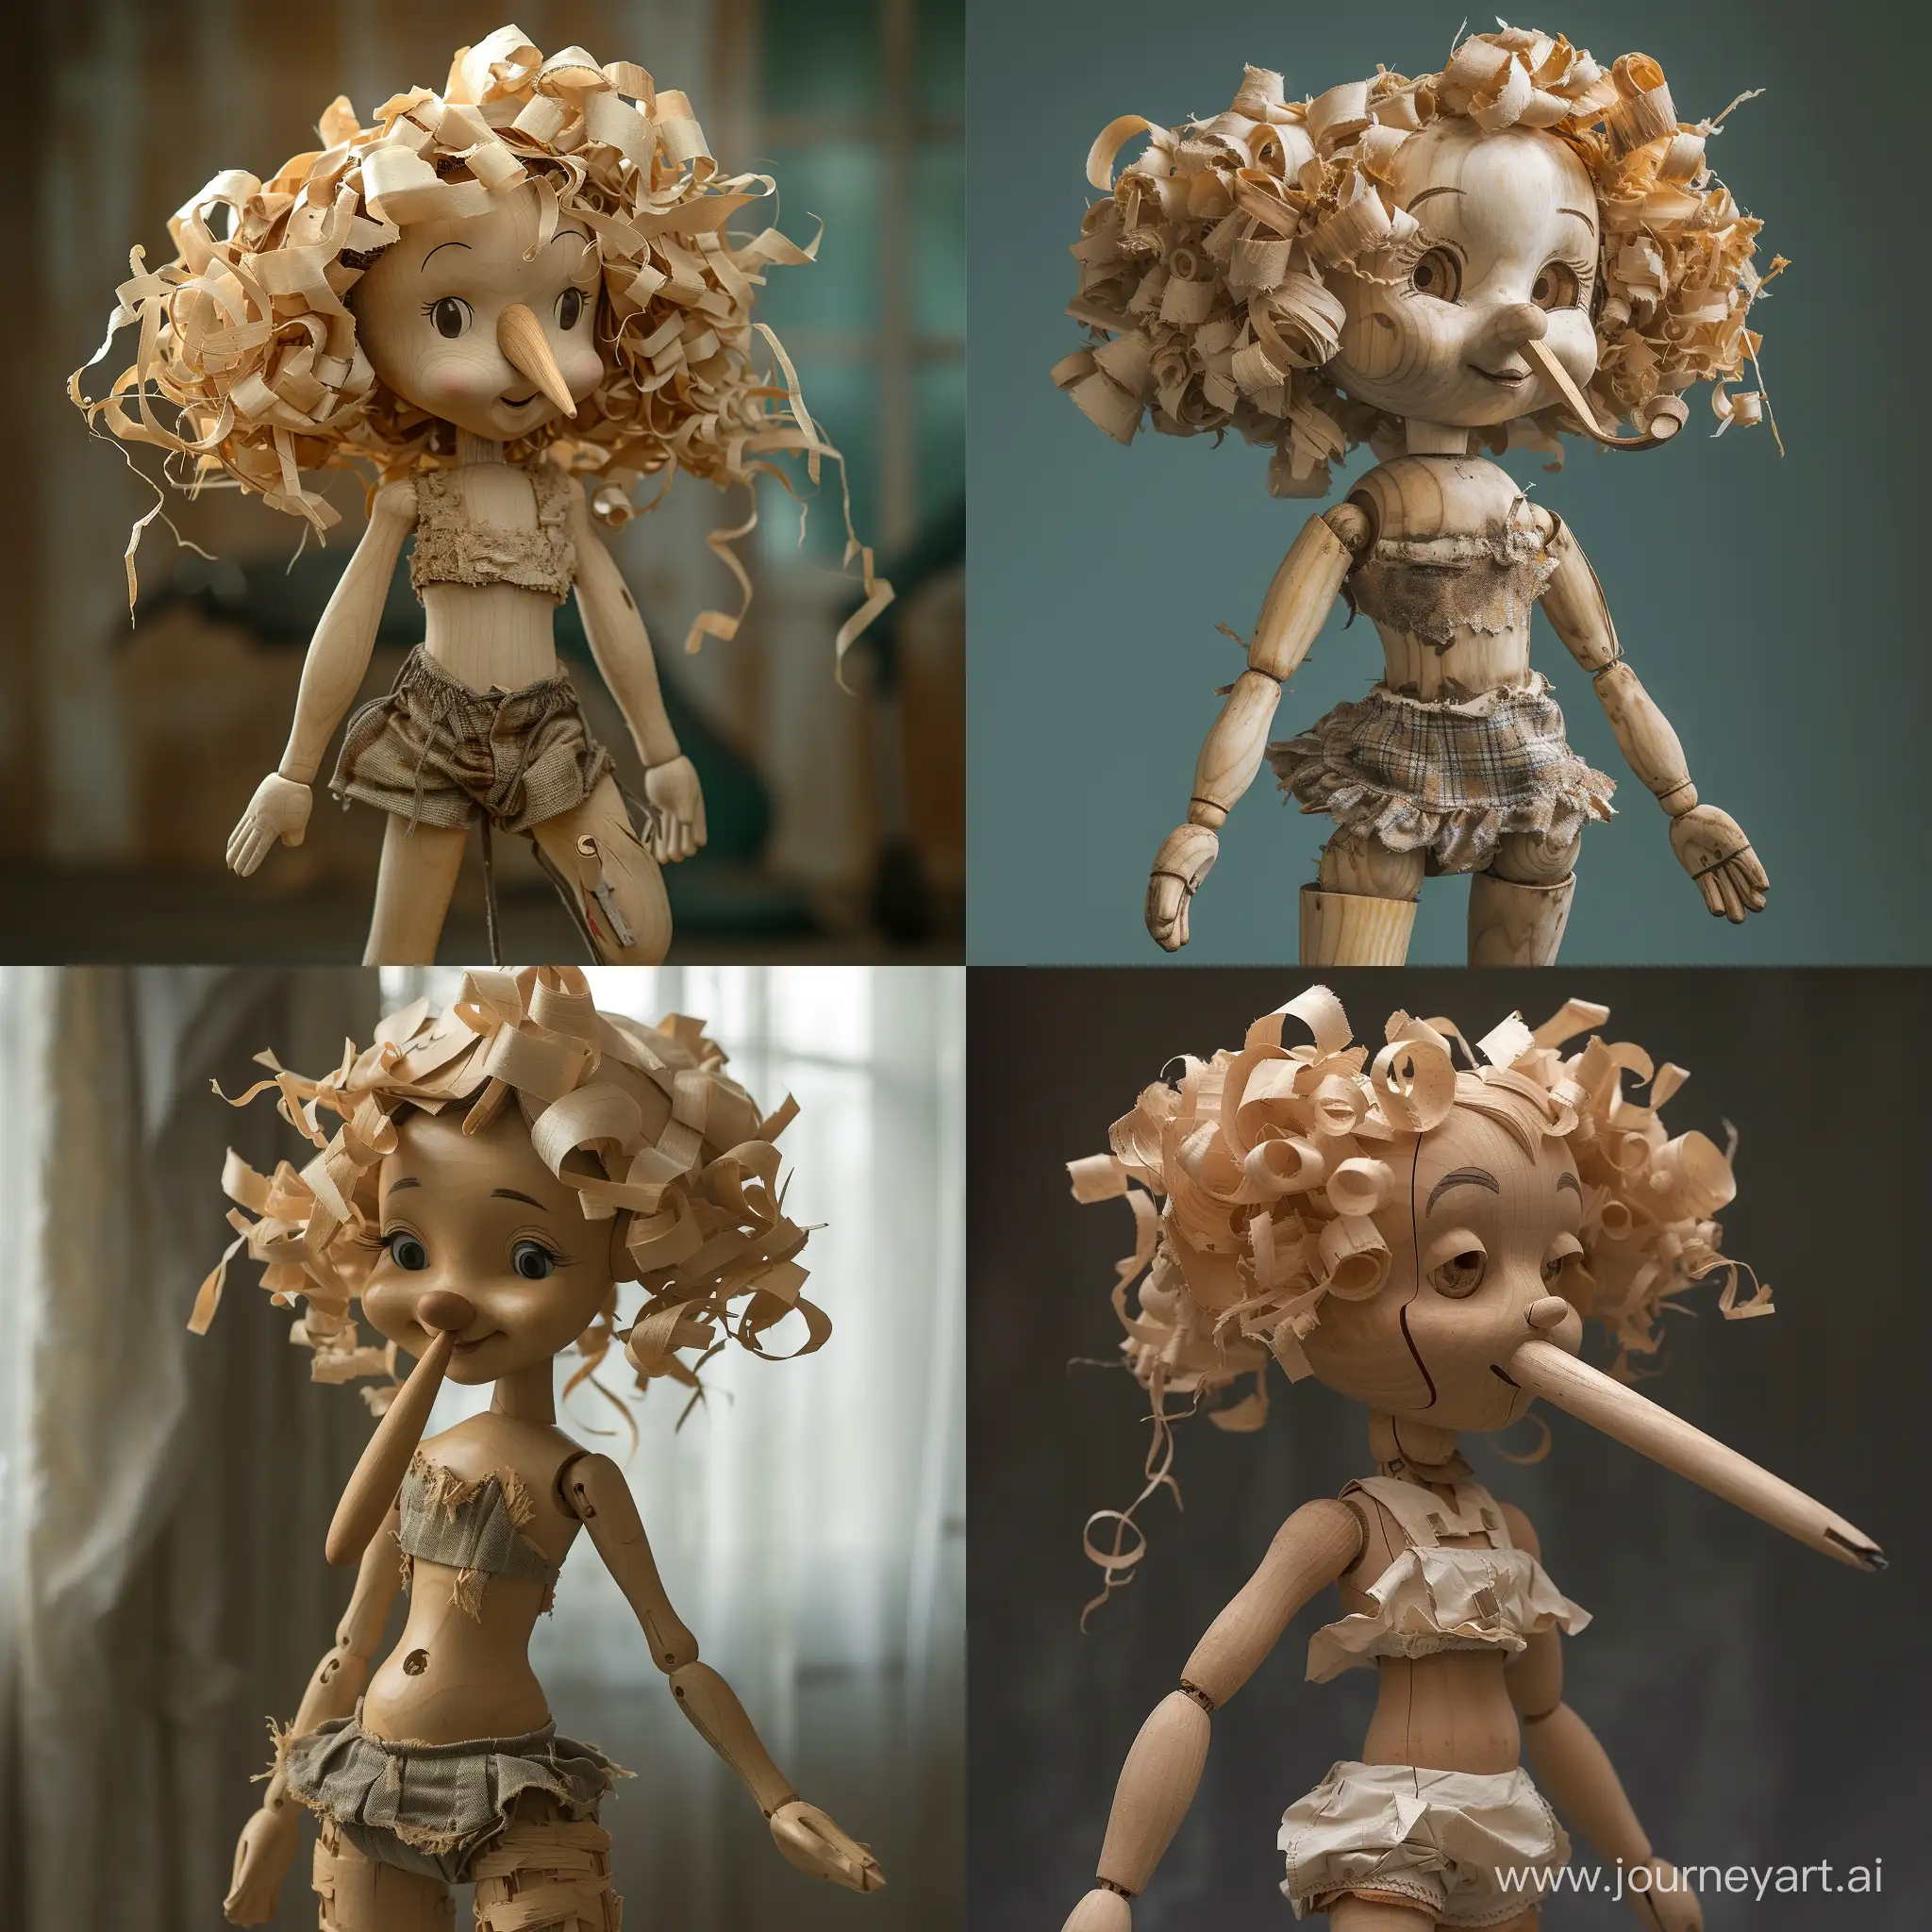 Enchanting-Wooden-Pinocchio-Girl-with-Long-Nose-and-Curly-Wood-Shavings-Hair